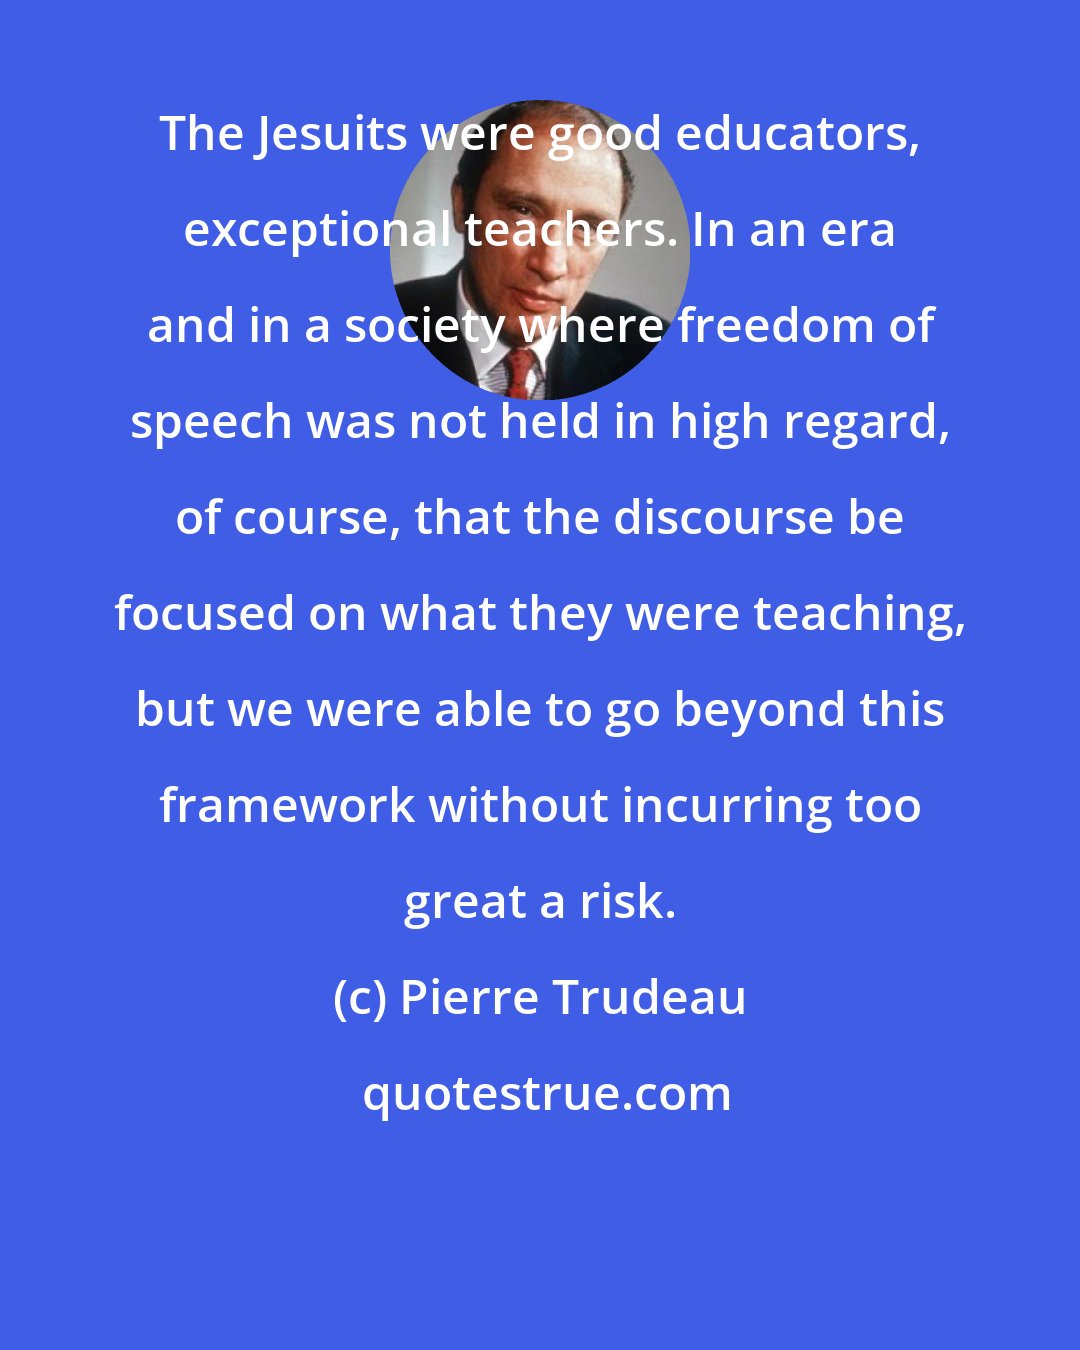 Pierre Trudeau: The Jesuits were good educators, exceptional teachers. In an era and in a society where freedom of speech was not held in high regard, of course, that the discourse be focused on what they were teaching, but we were able to go beyond this framework without incurring too great a risk.